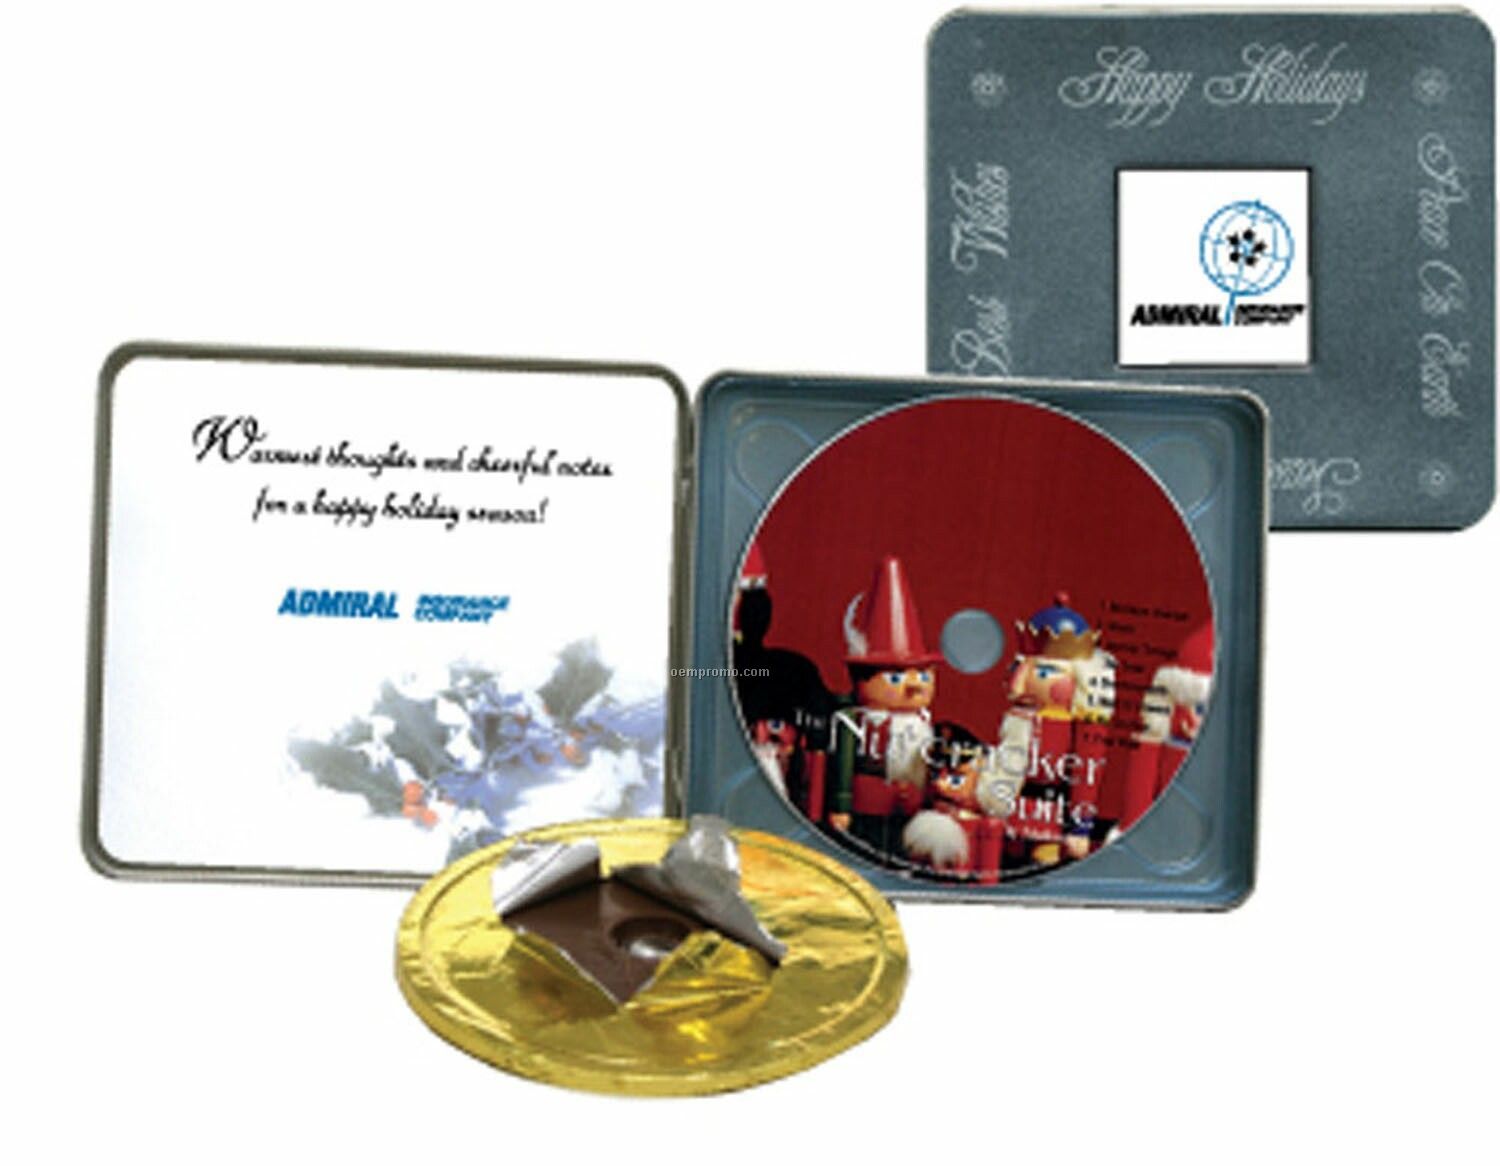 Nutcracker Suite & Sweet In A Tin Music CD & Chocolate CD